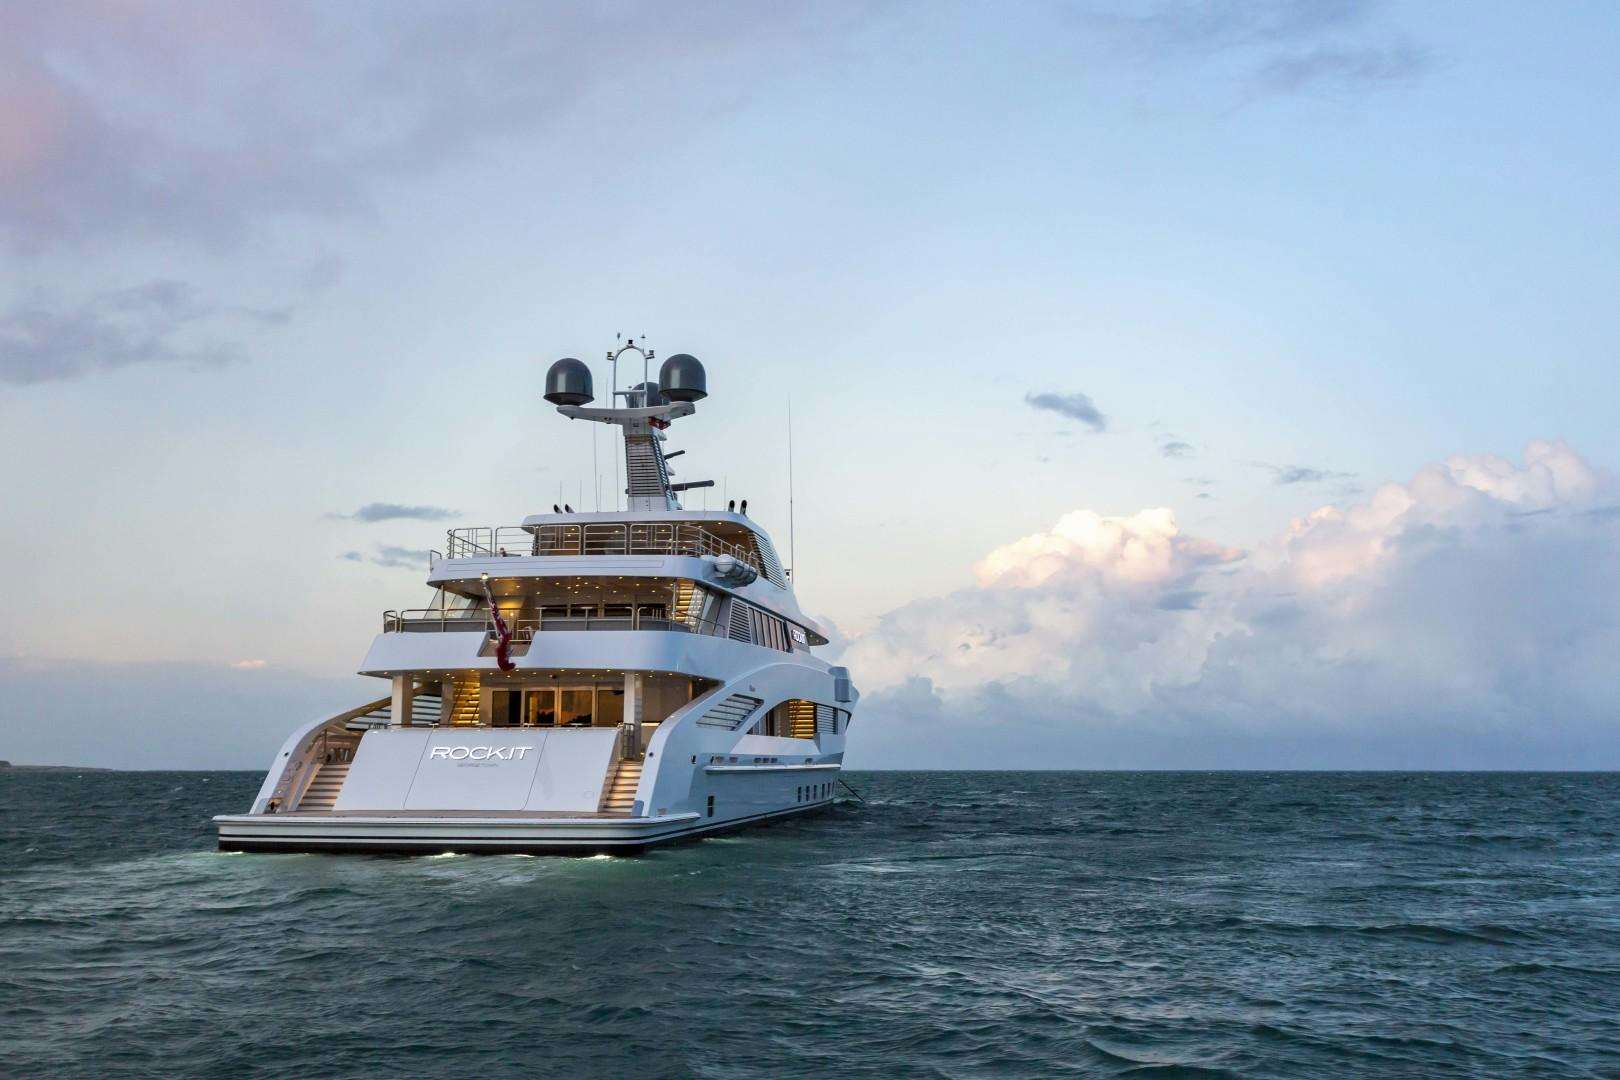 ROCK.IT Yacht for Charter, 197' (60.05m) 2014 5 Cabins Feadship